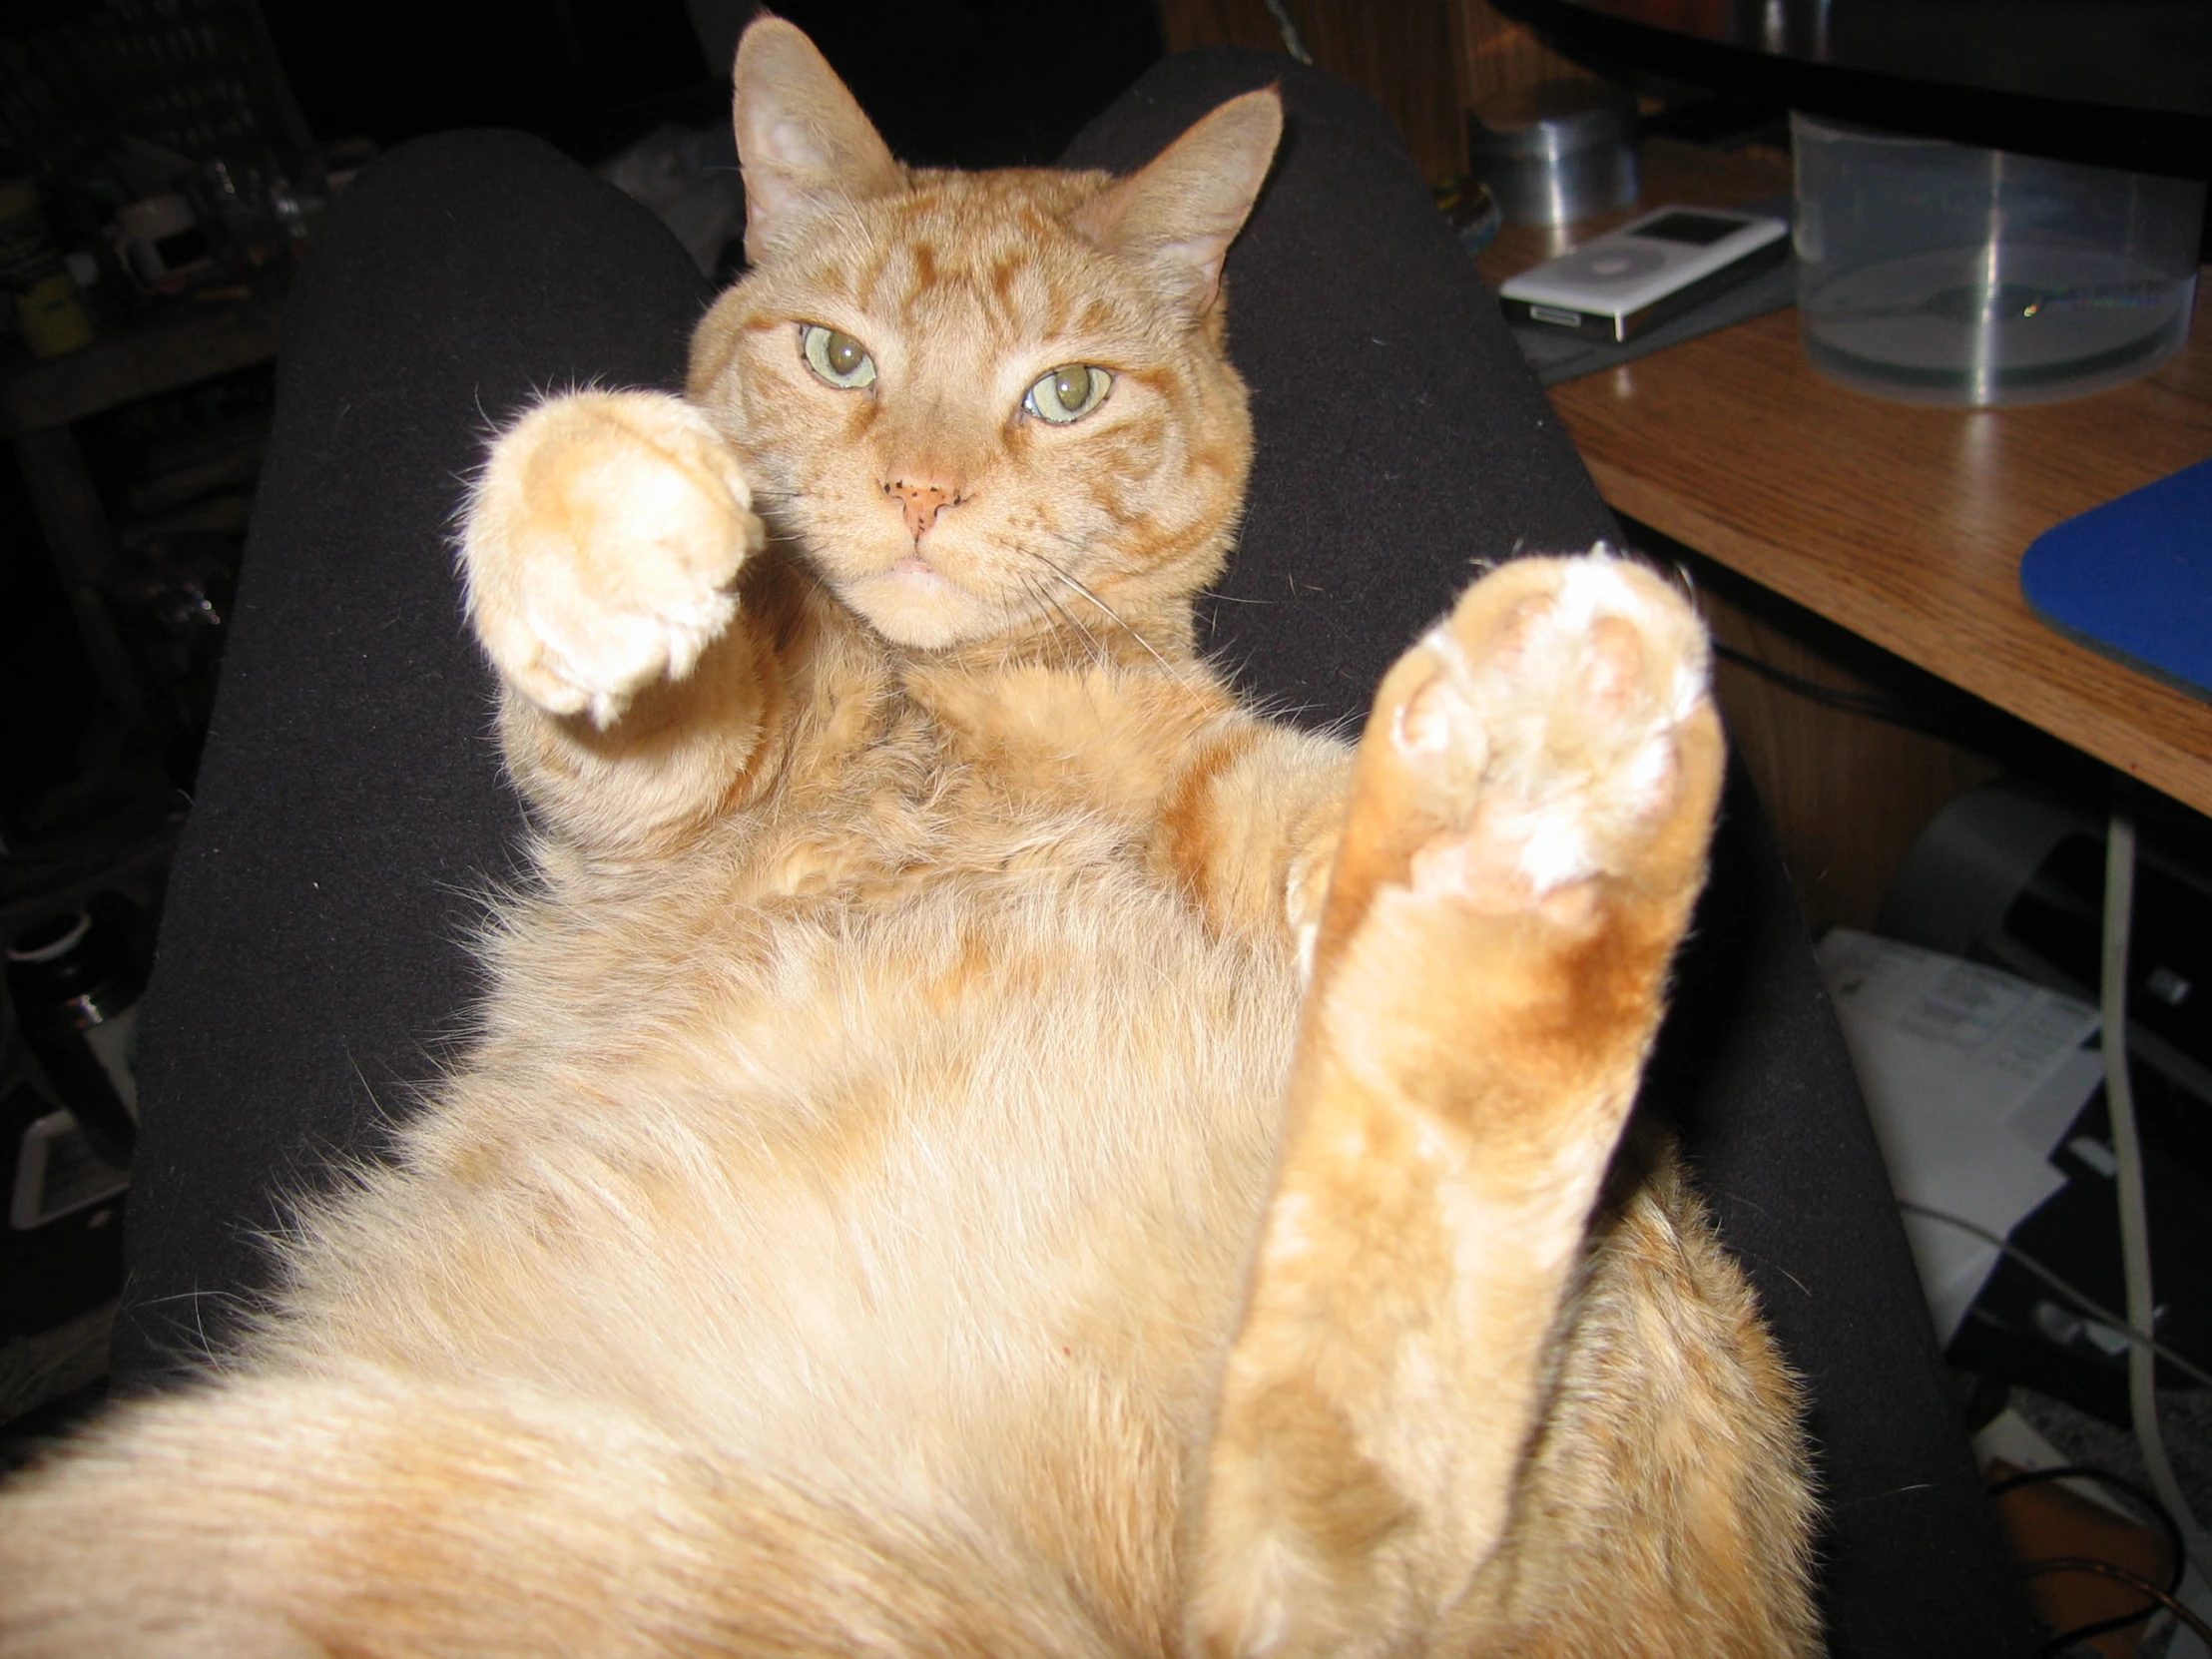 a cat sitting in a chair making a fist gesture